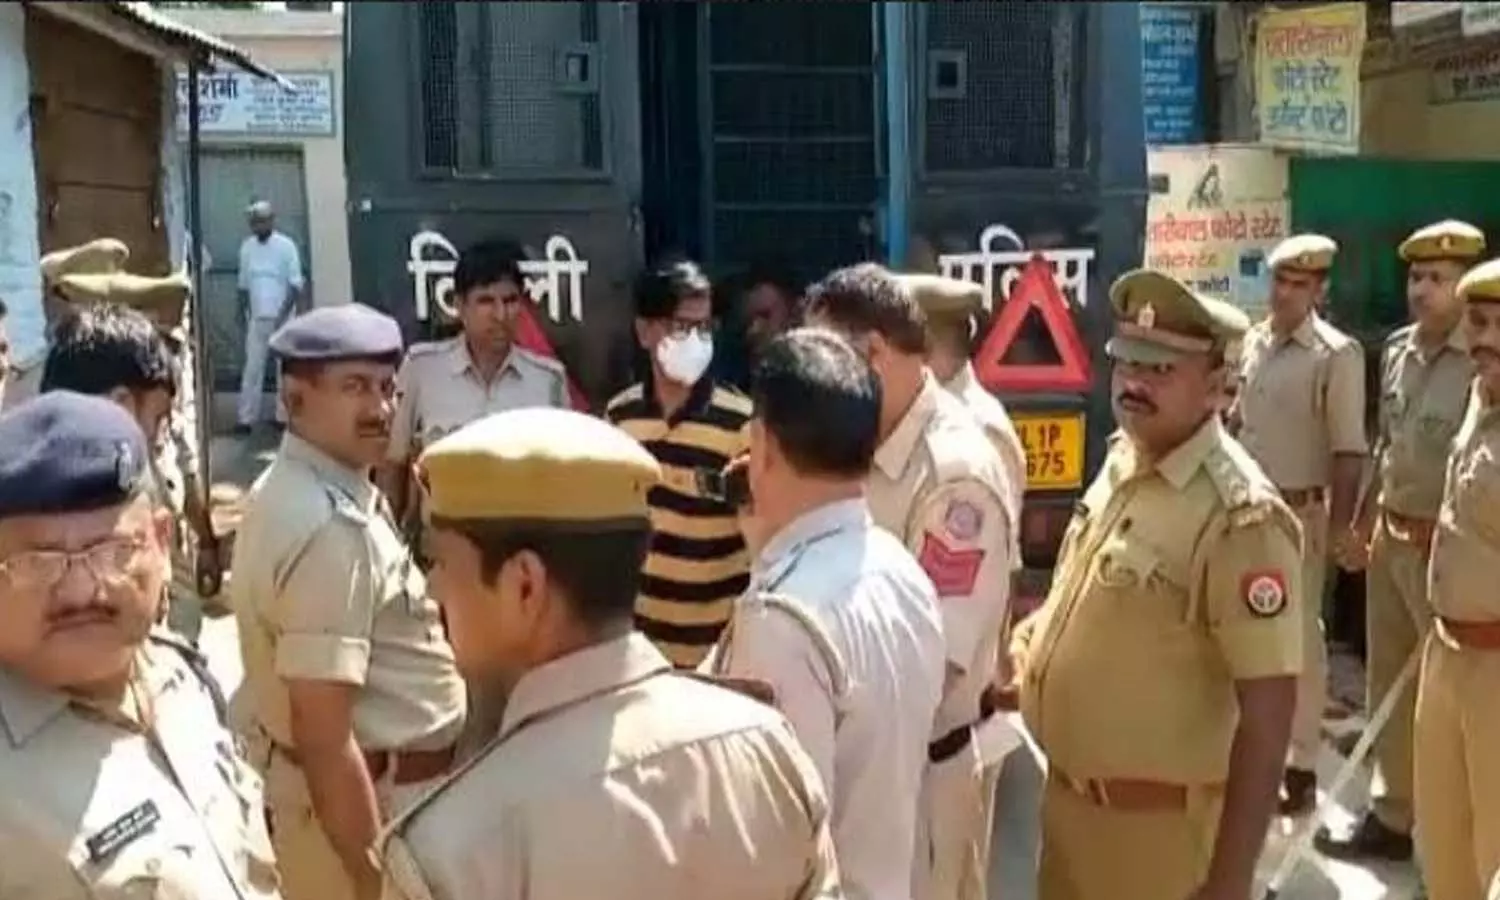 Delhi Police presented Mohammad Zubair, accused of inciting violence, in Hathras court, two cases registered